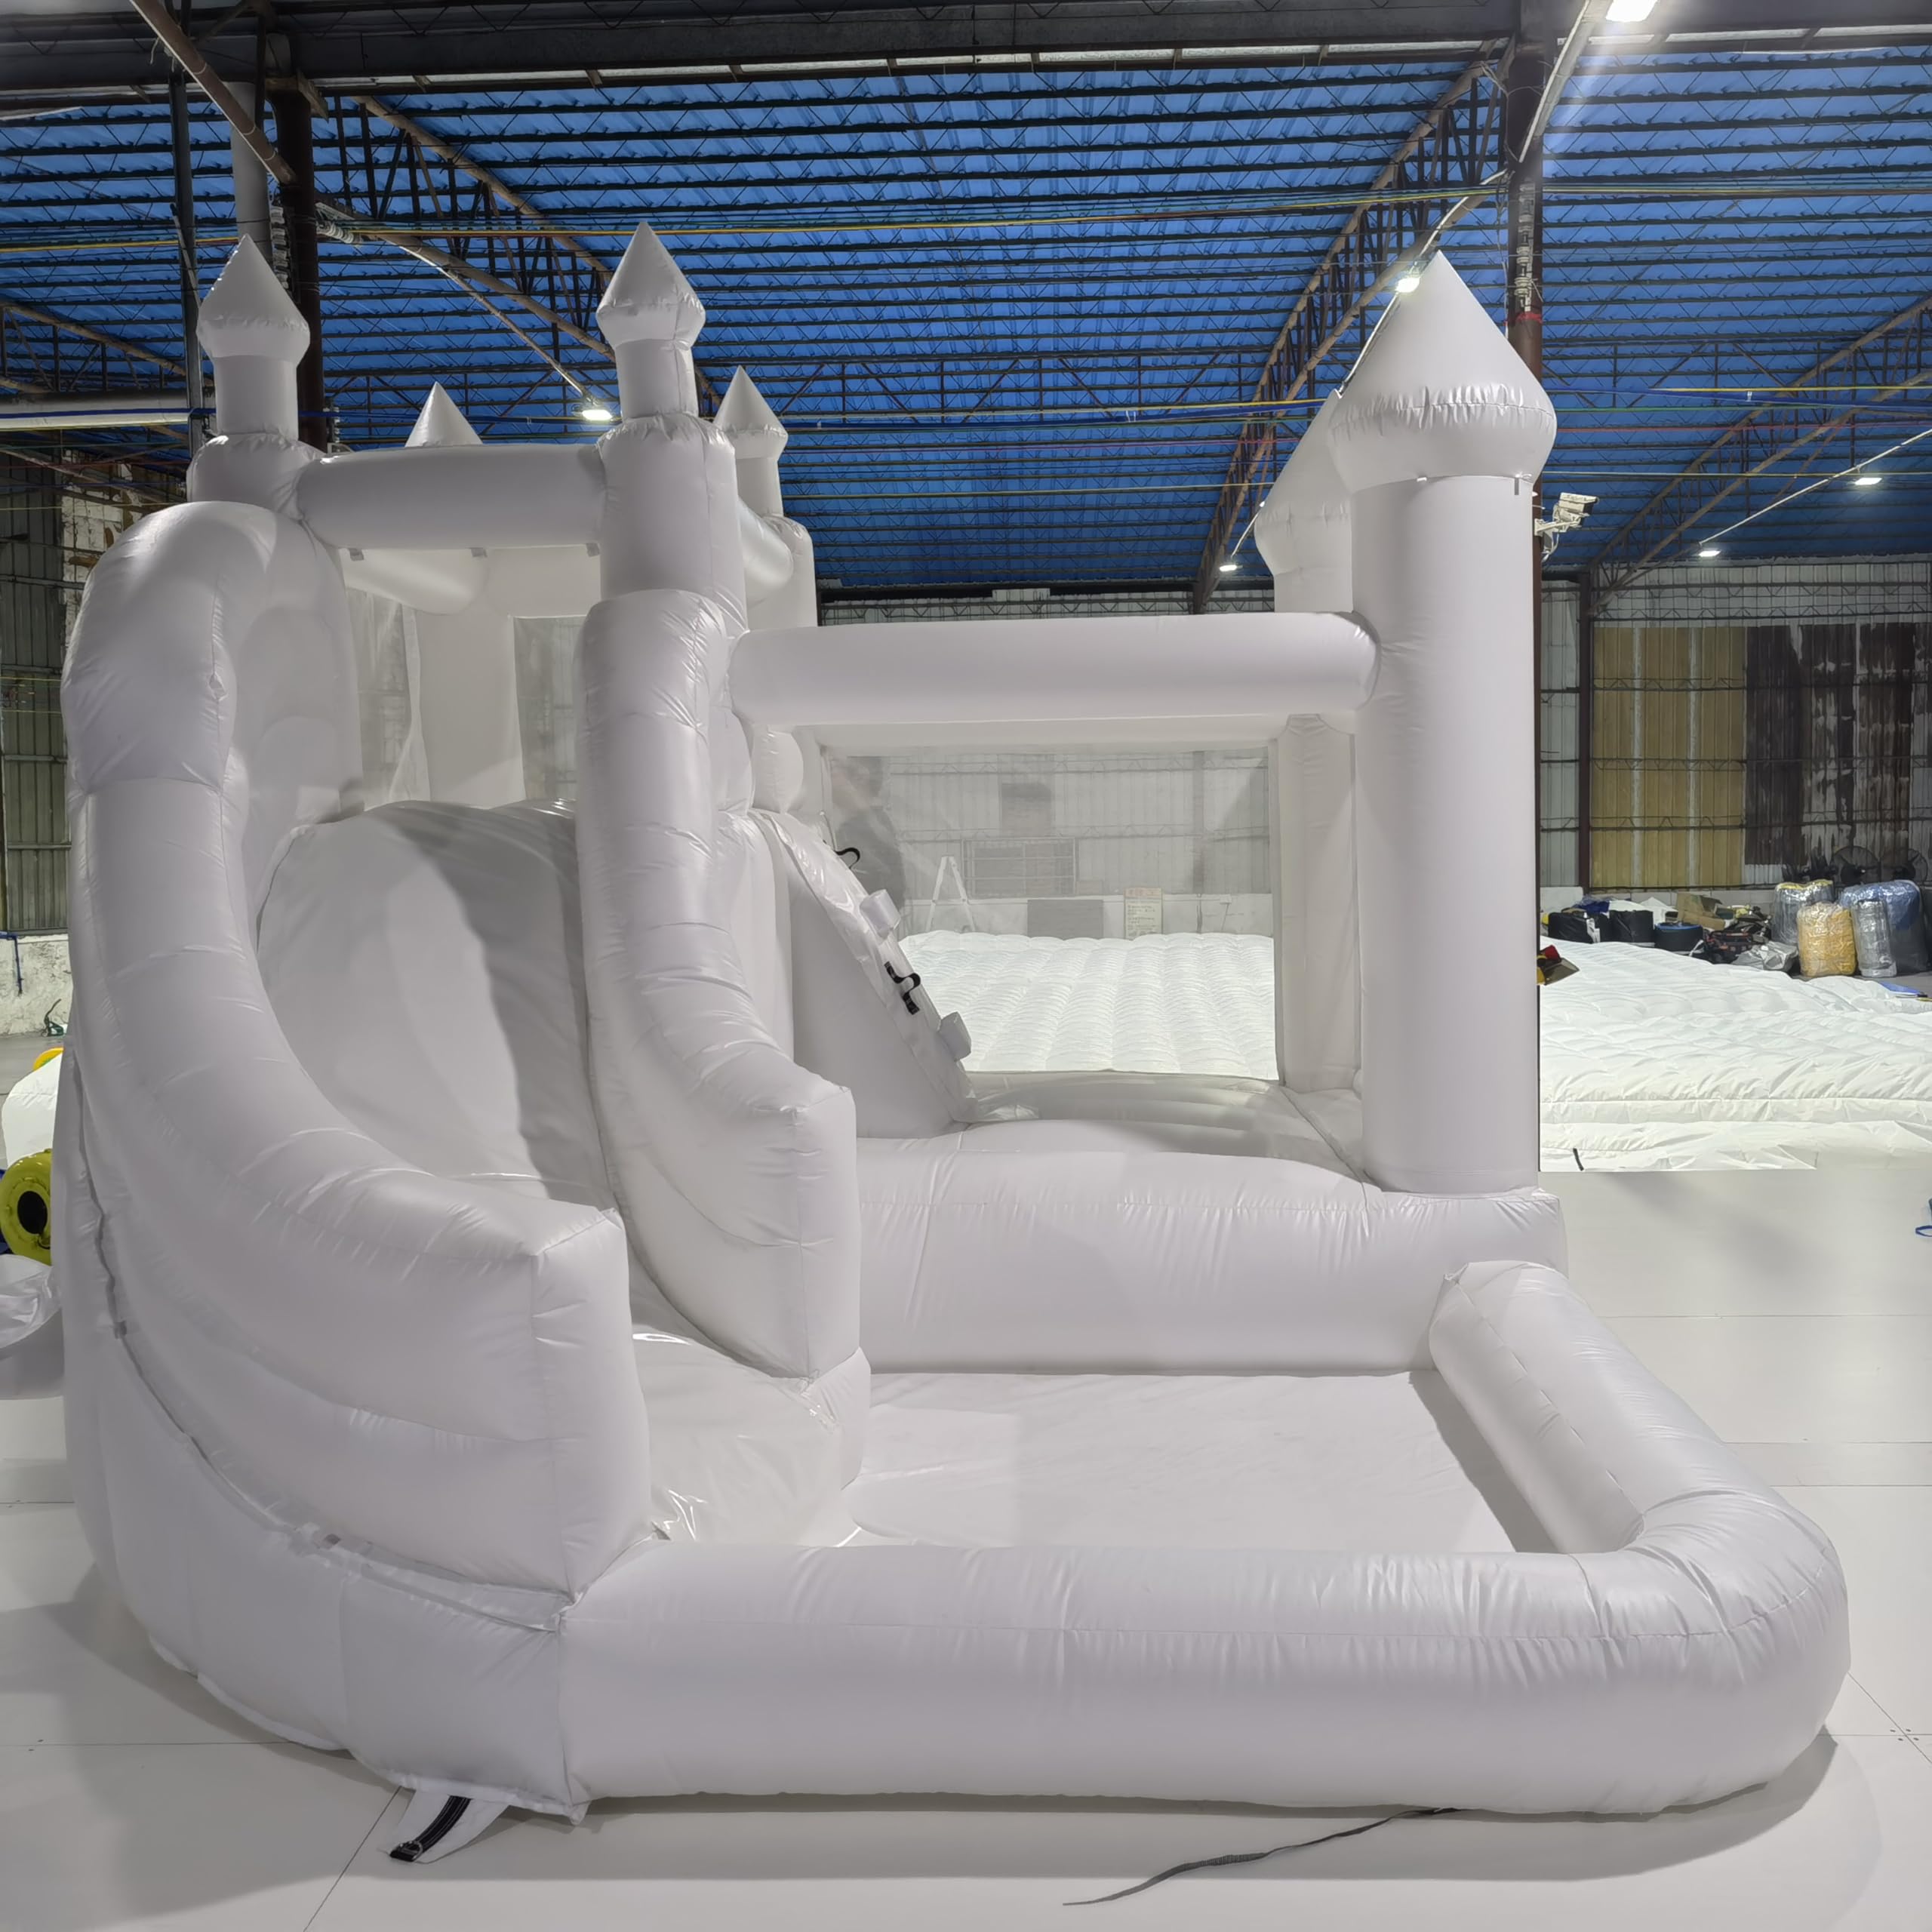 White Bounce House Castle PVC Inflatable with Slide Jumper Bouncy Castle with Blower White Jumper Bouncy Castle Wedding Decorations Jumping Bed for Kids(15FTX 11.5FTX10FT)